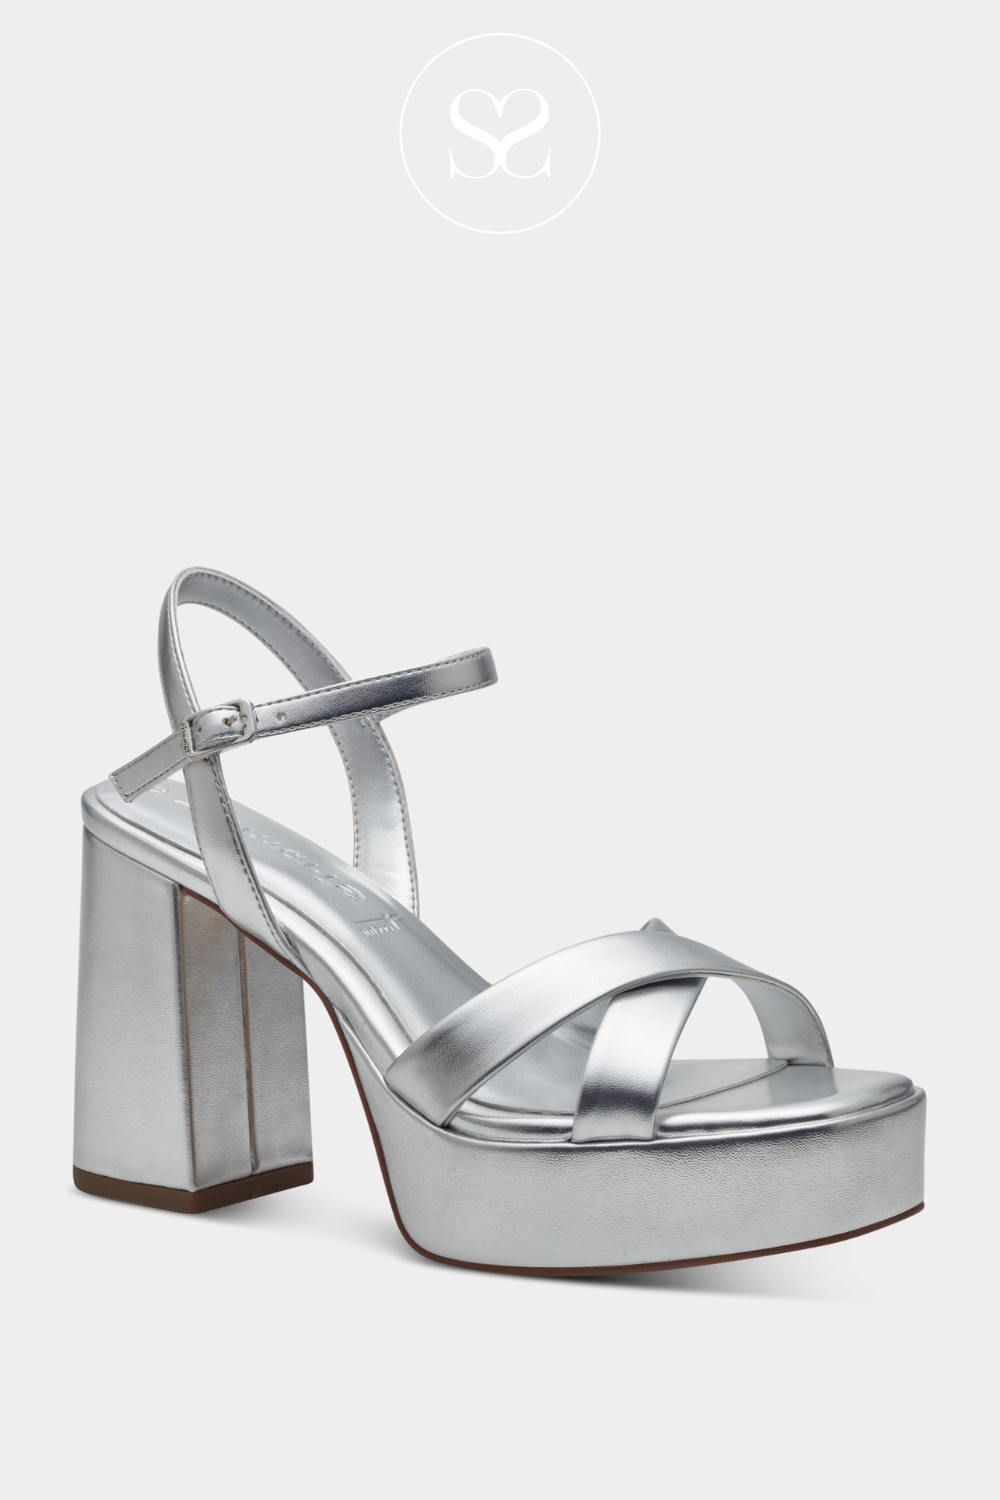 TAMARIS 1-28051-42 SILVER METALLIC PLATFORM SOLE BLOCK HEELED SANDALS WITH CRISS CROSS STRAPS AND ADJUSTABLE ANKLE STRAP